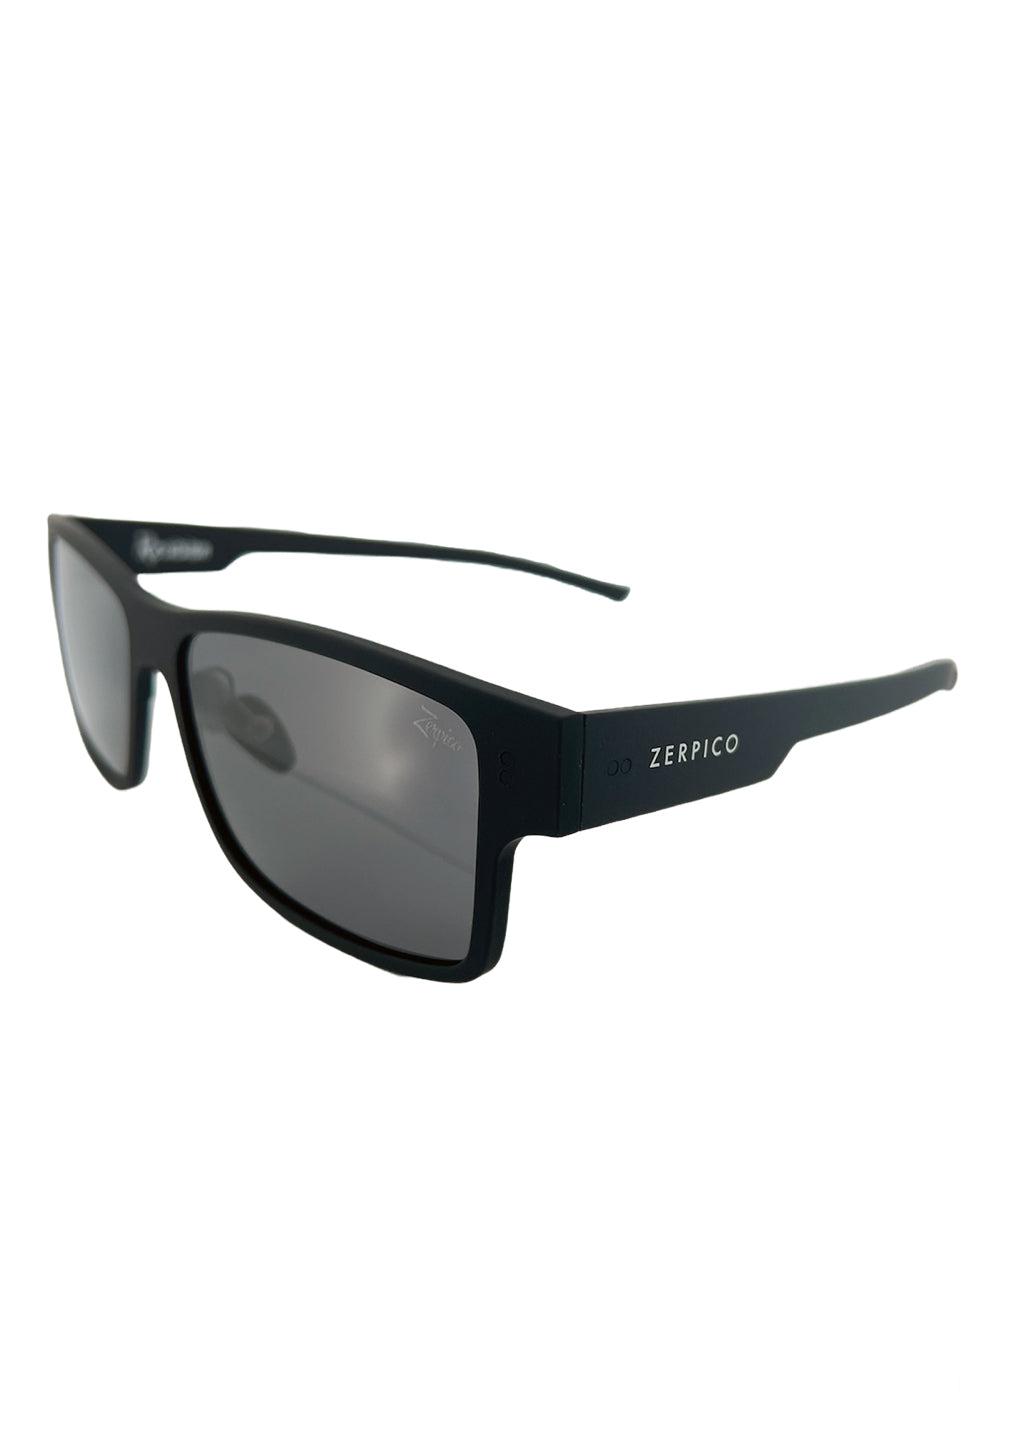 ReVision Square - Eco-Friendly Recyclable Paper Sunglasses, studio photo from the side. Of our black frame.